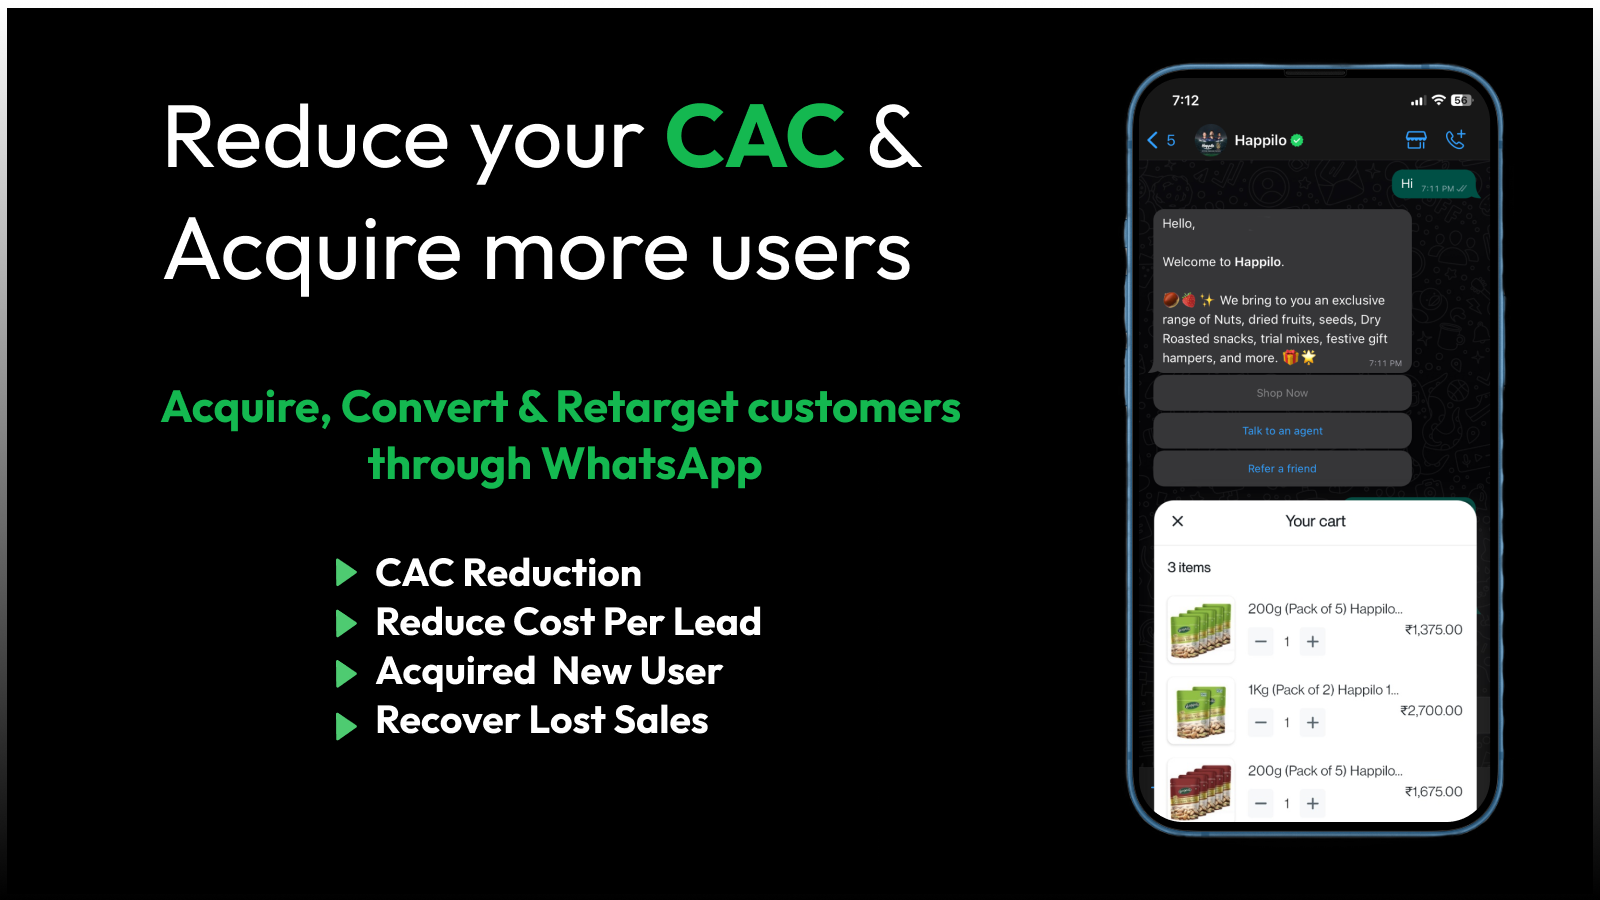 Reduce your CAC and acquire more users